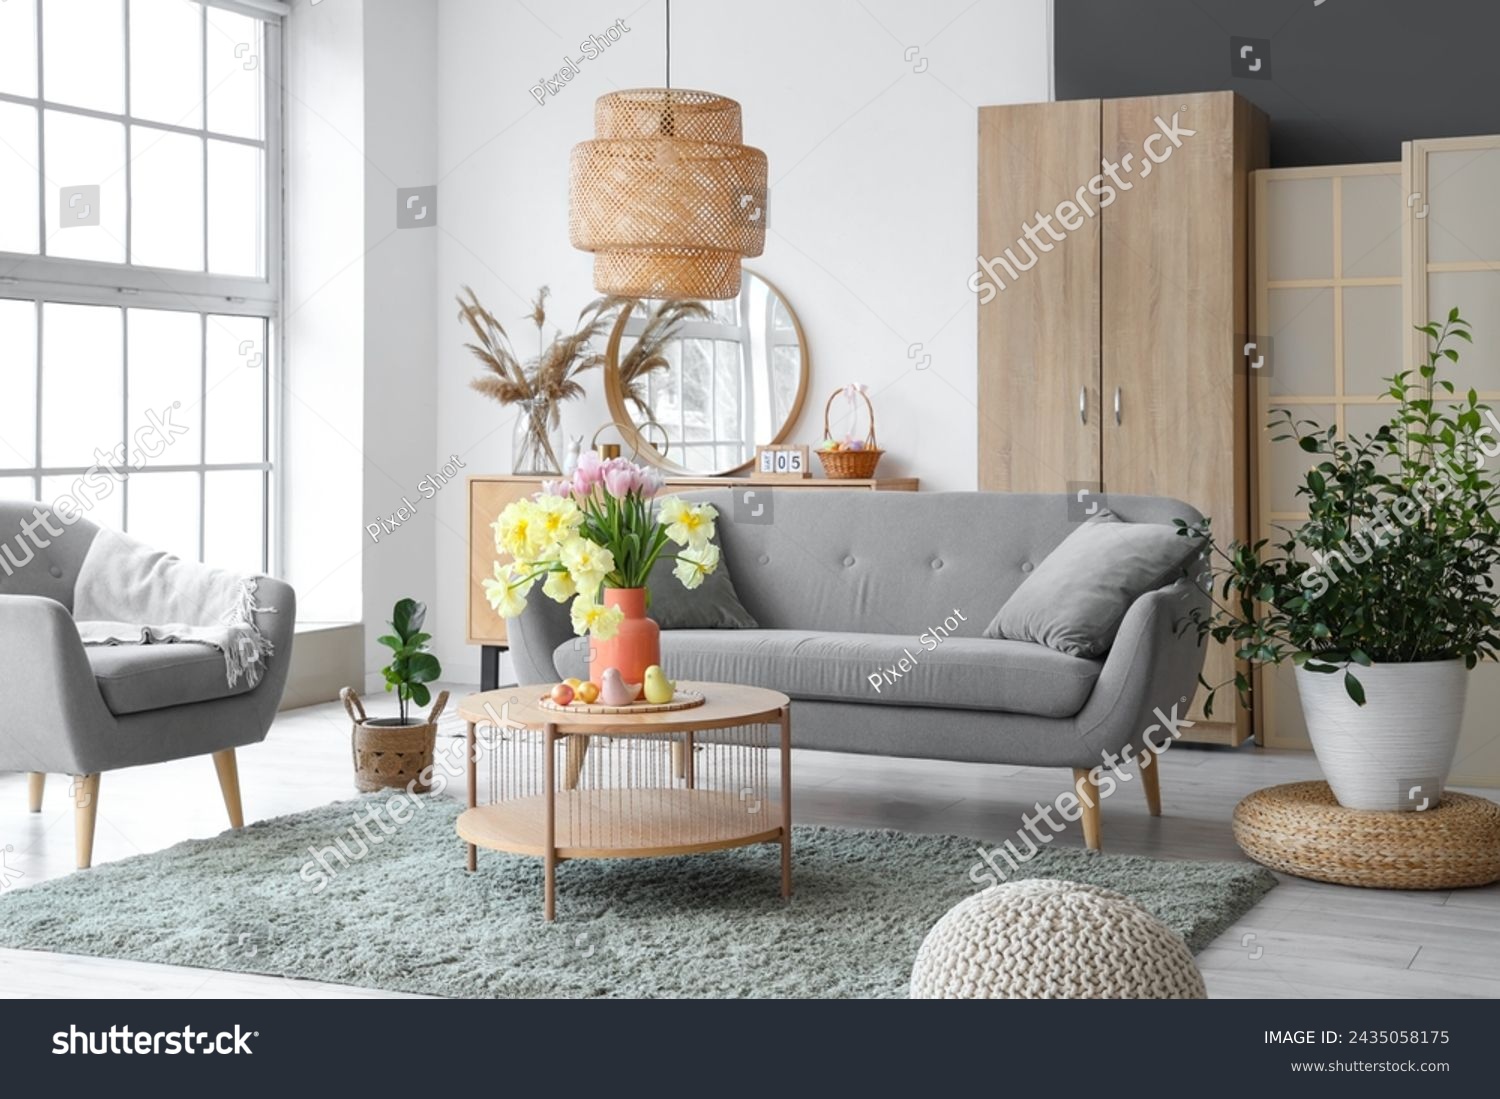 Interior of modern living room with flowers, Easter eggs and porcelain quails on coffee table #2435058175